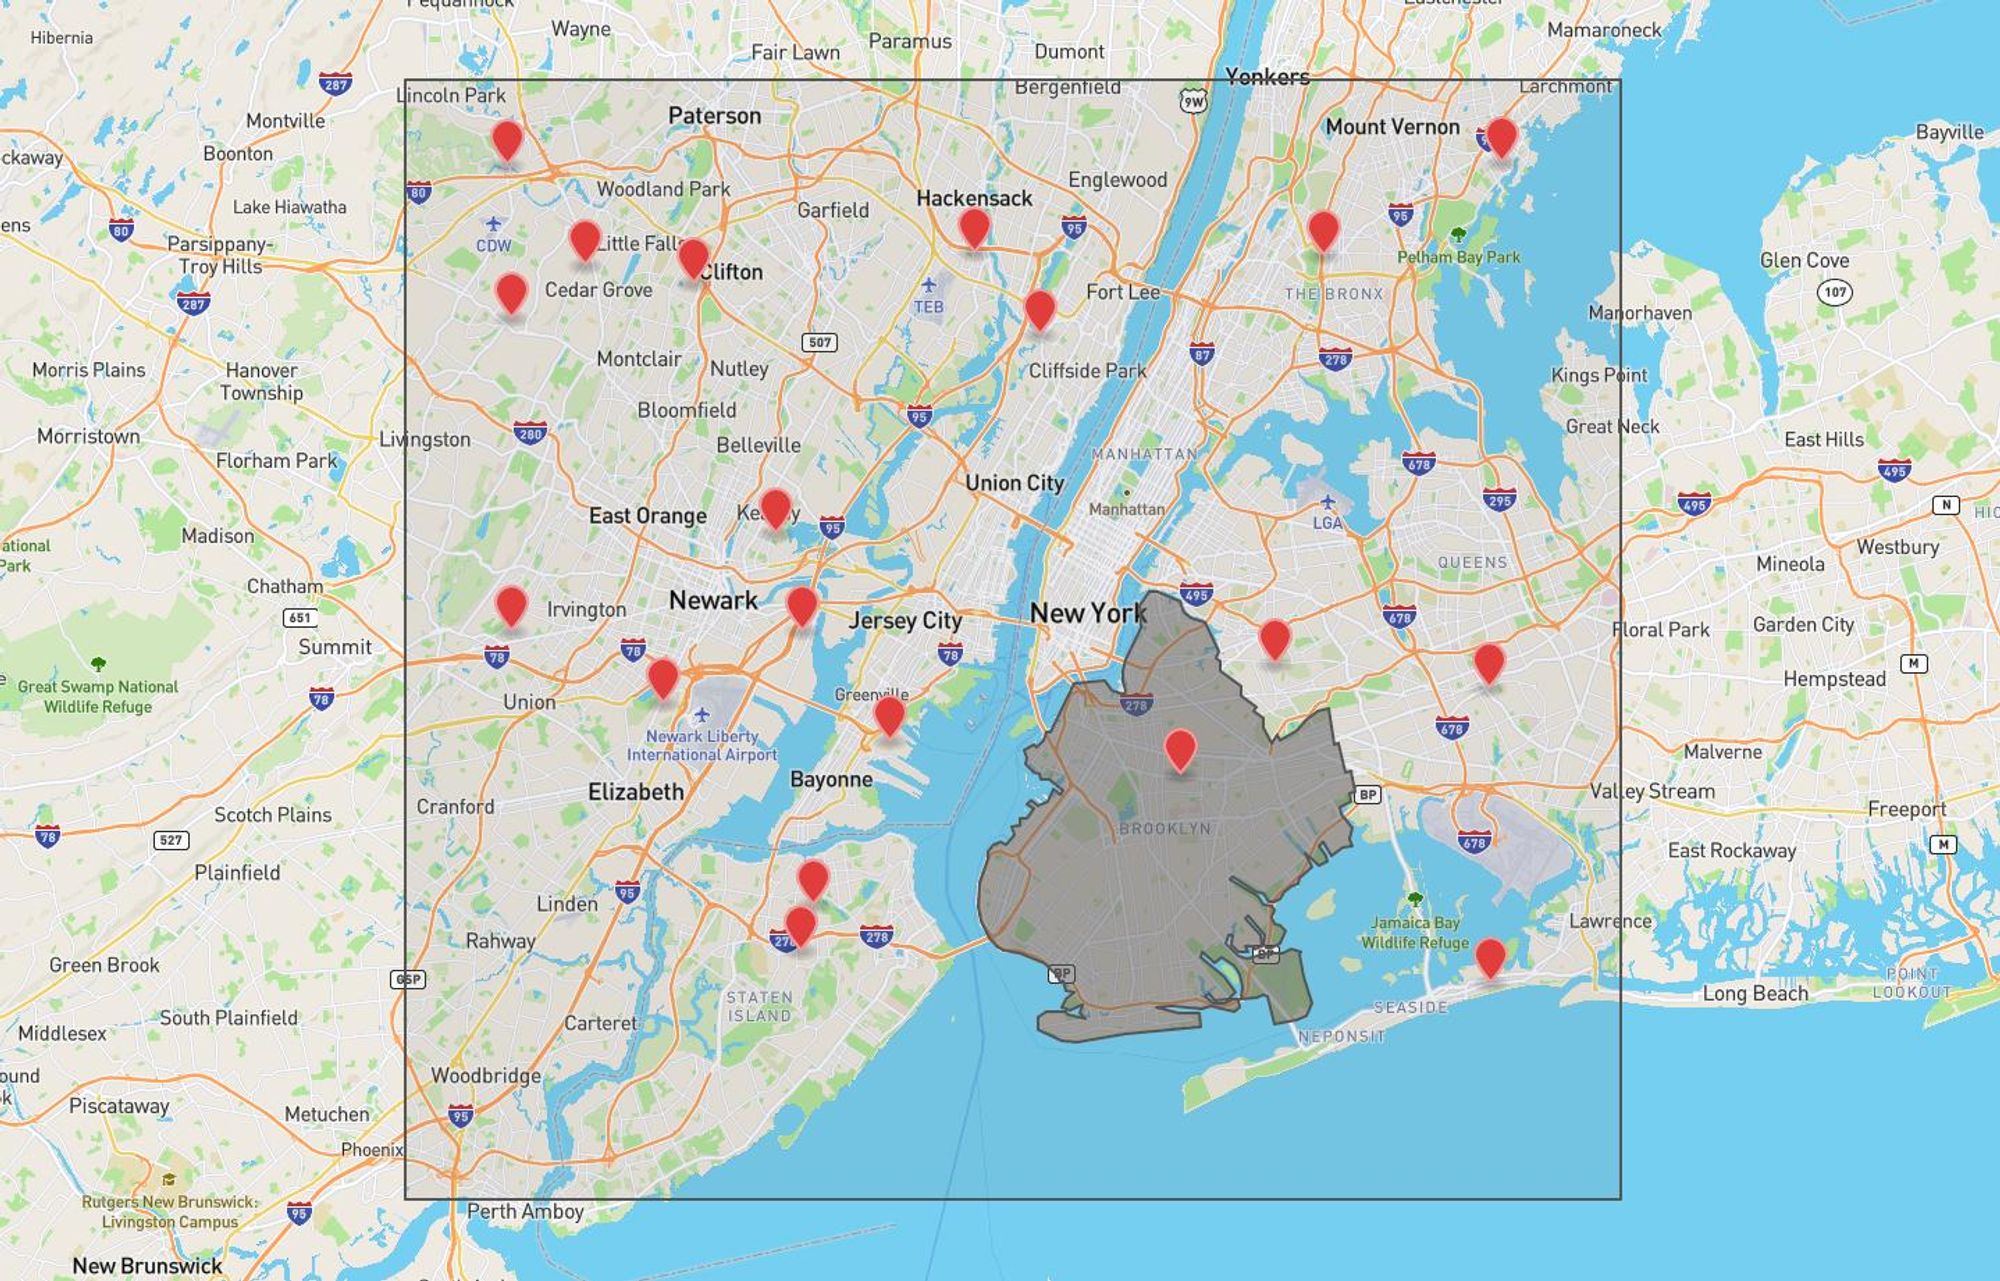 Randomly generated points of interest in the NYC area. Base map courtesy of http://geojson.io/